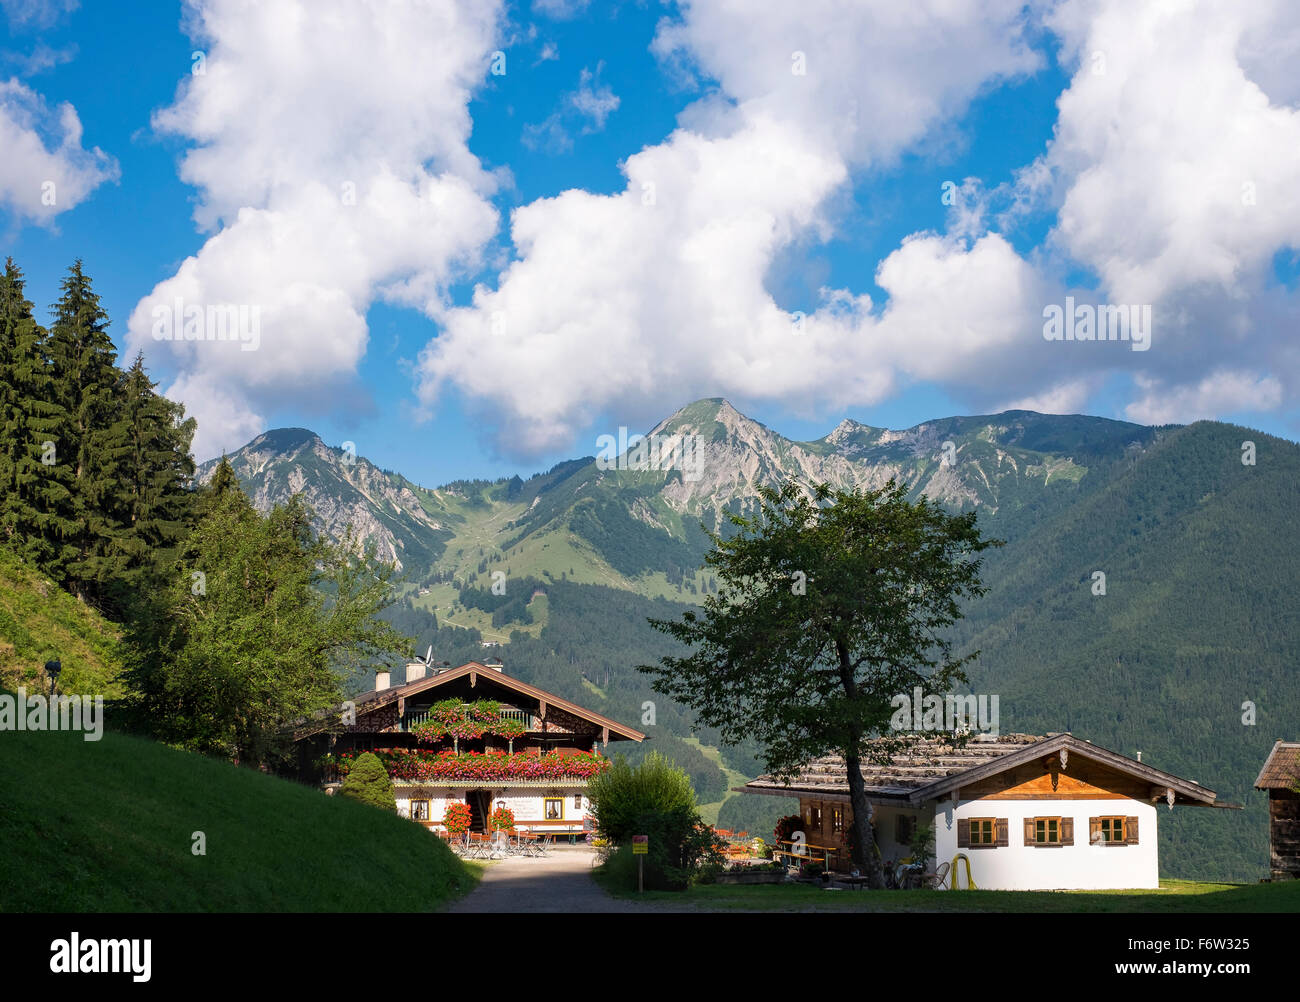 Streichen High Resolution Stock Photography and Images - Alamy